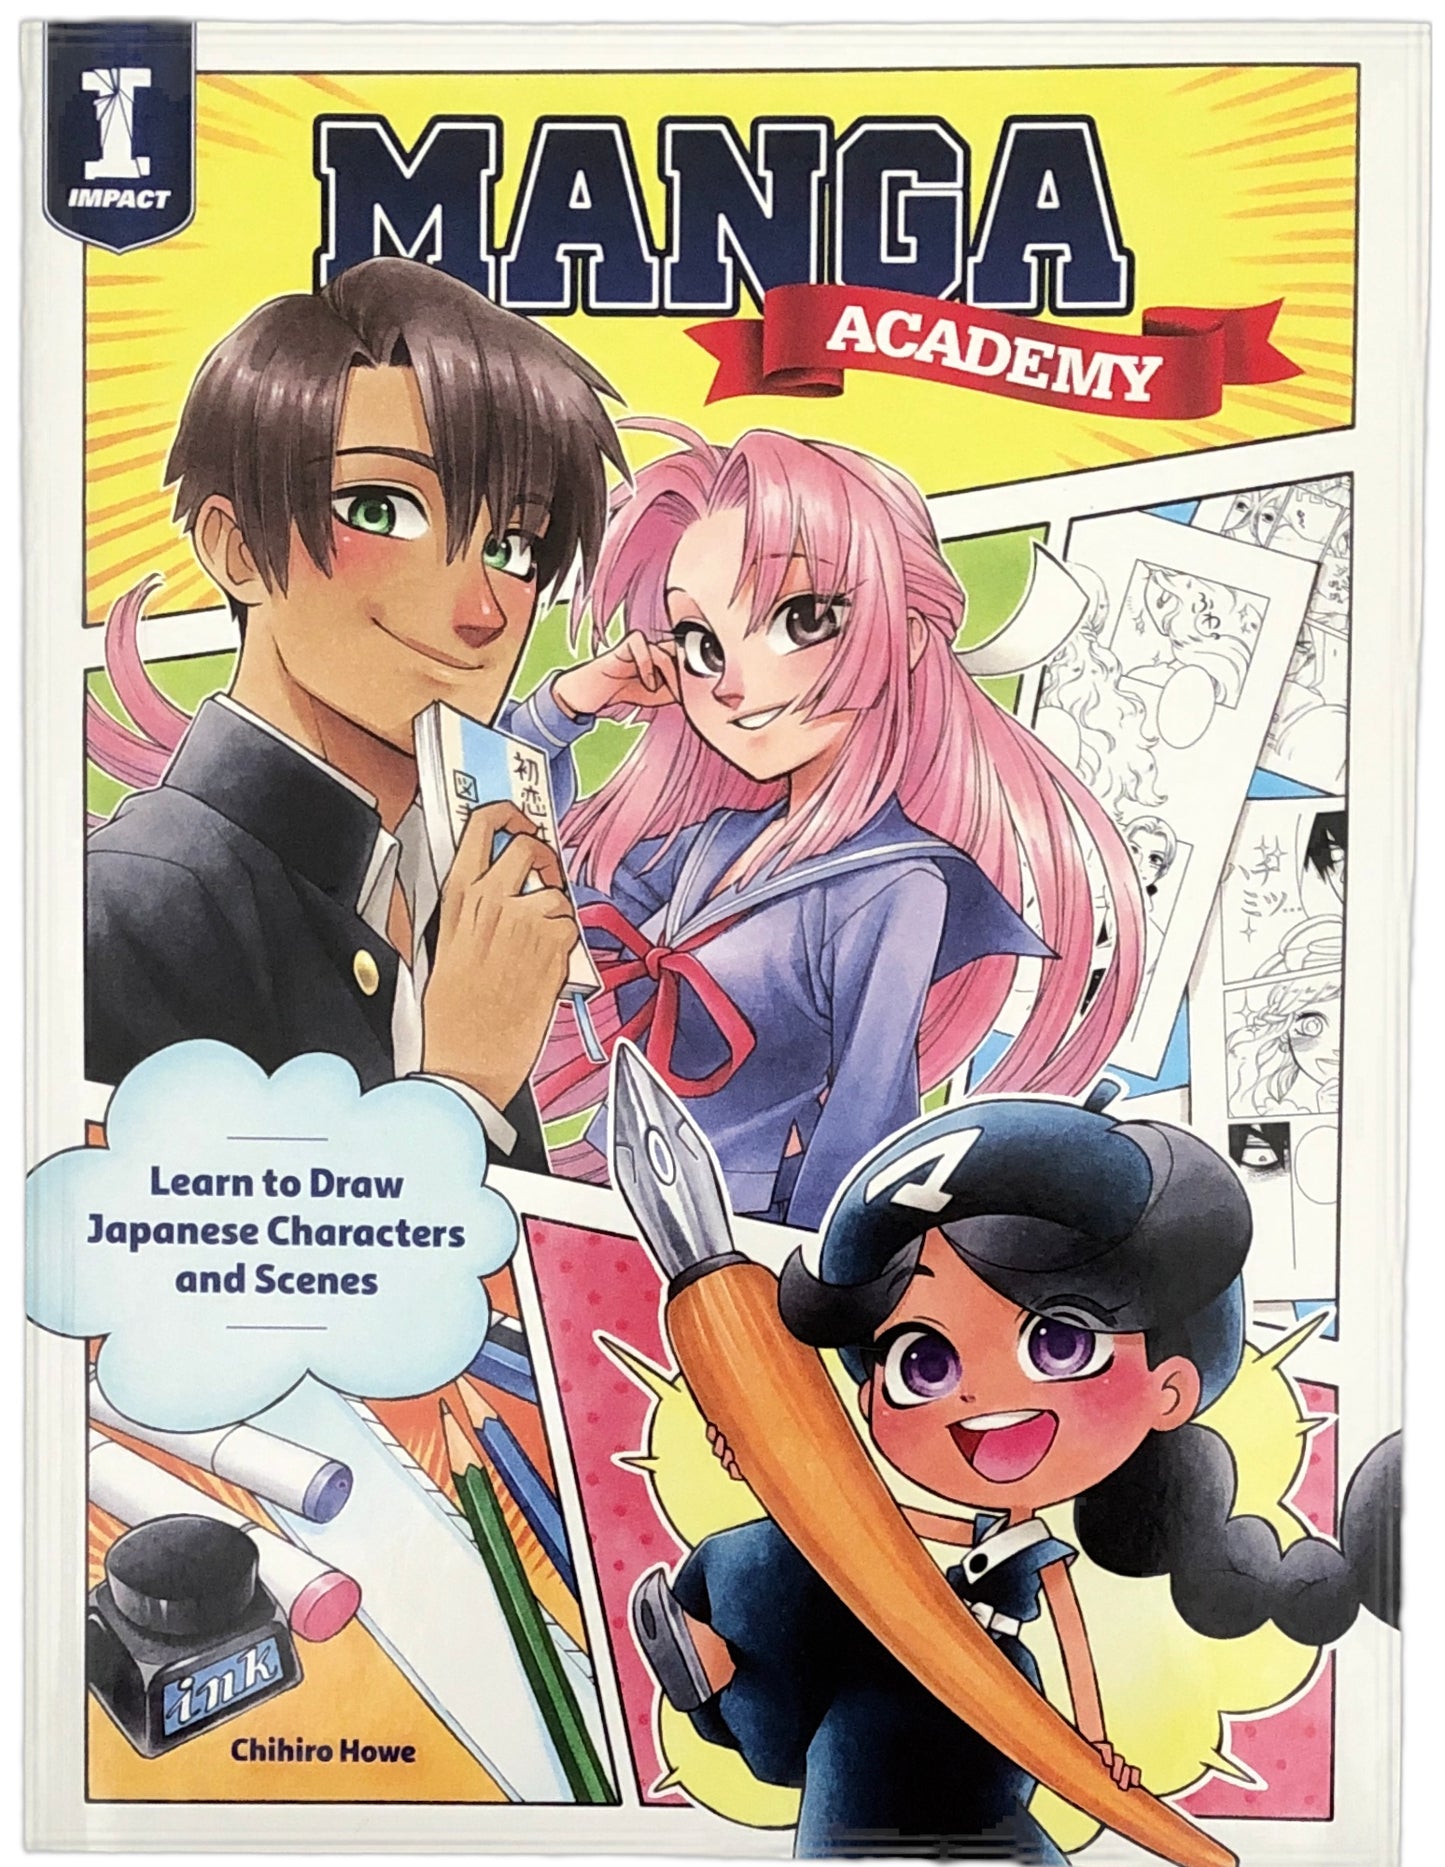 Manga Academy: Learn to Draw Japanese Characters and Scenes by Chihiro Howe